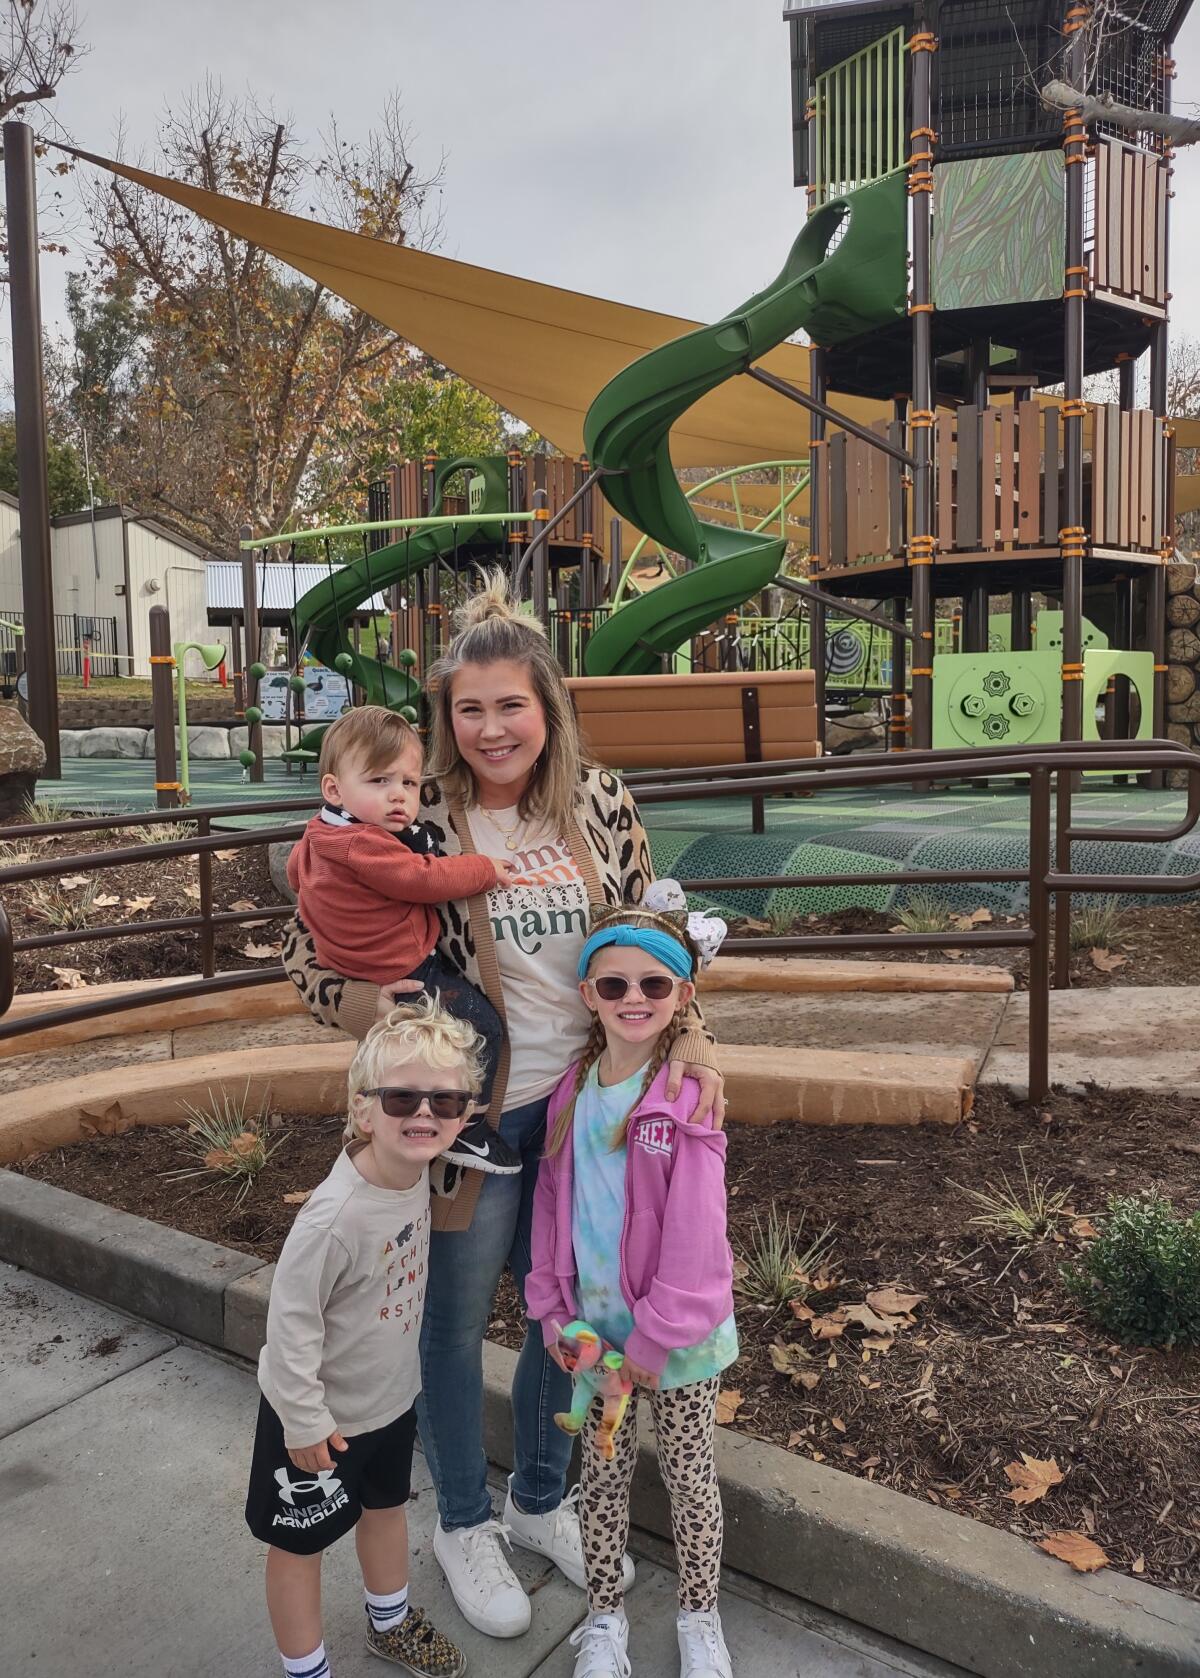 Kids have fun on opening day of Lake Poway's new $1.4M playground